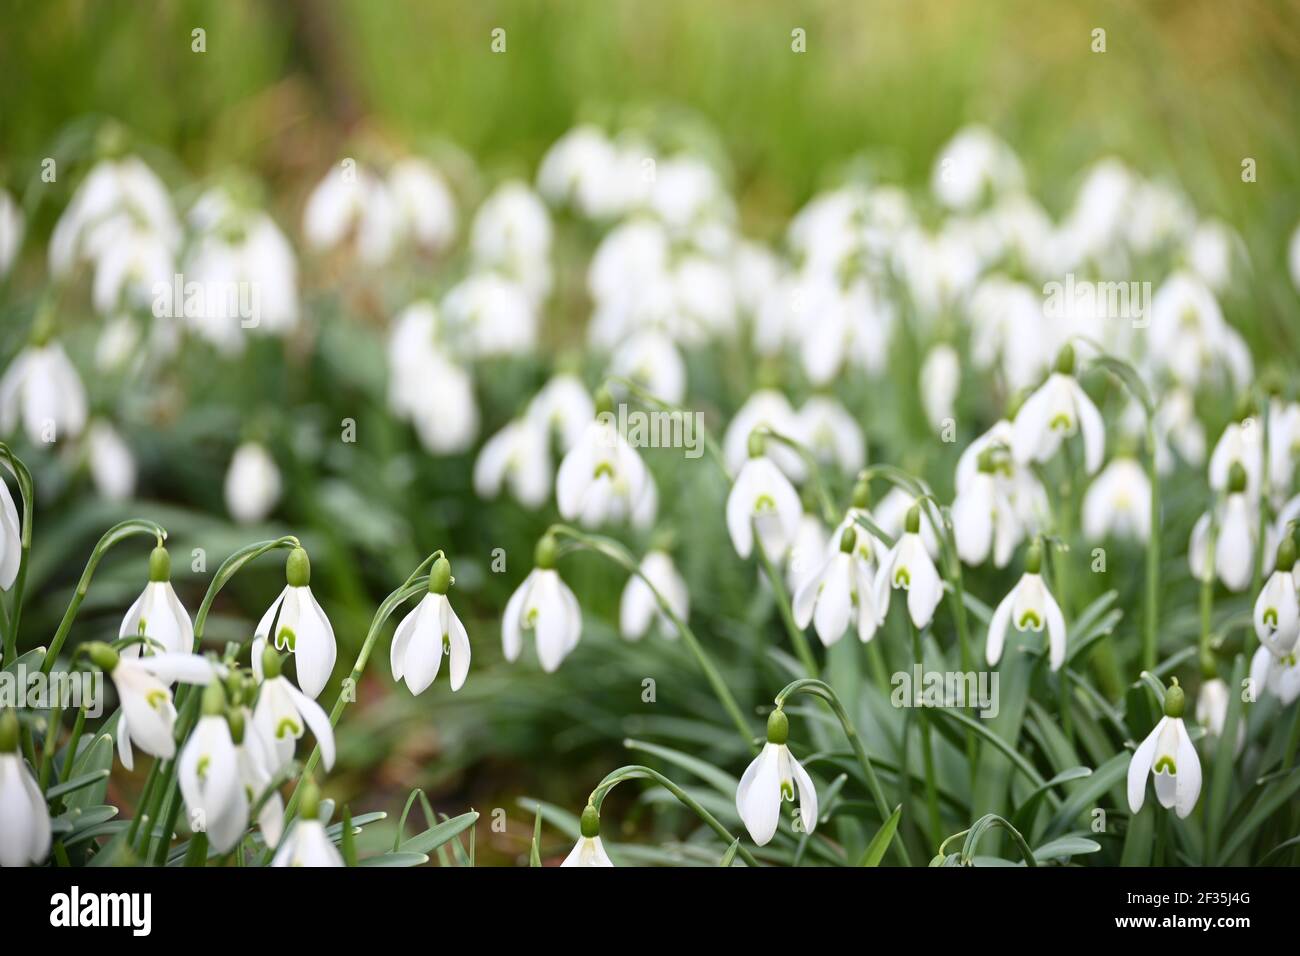 A pile of snowdrops Stock Photo